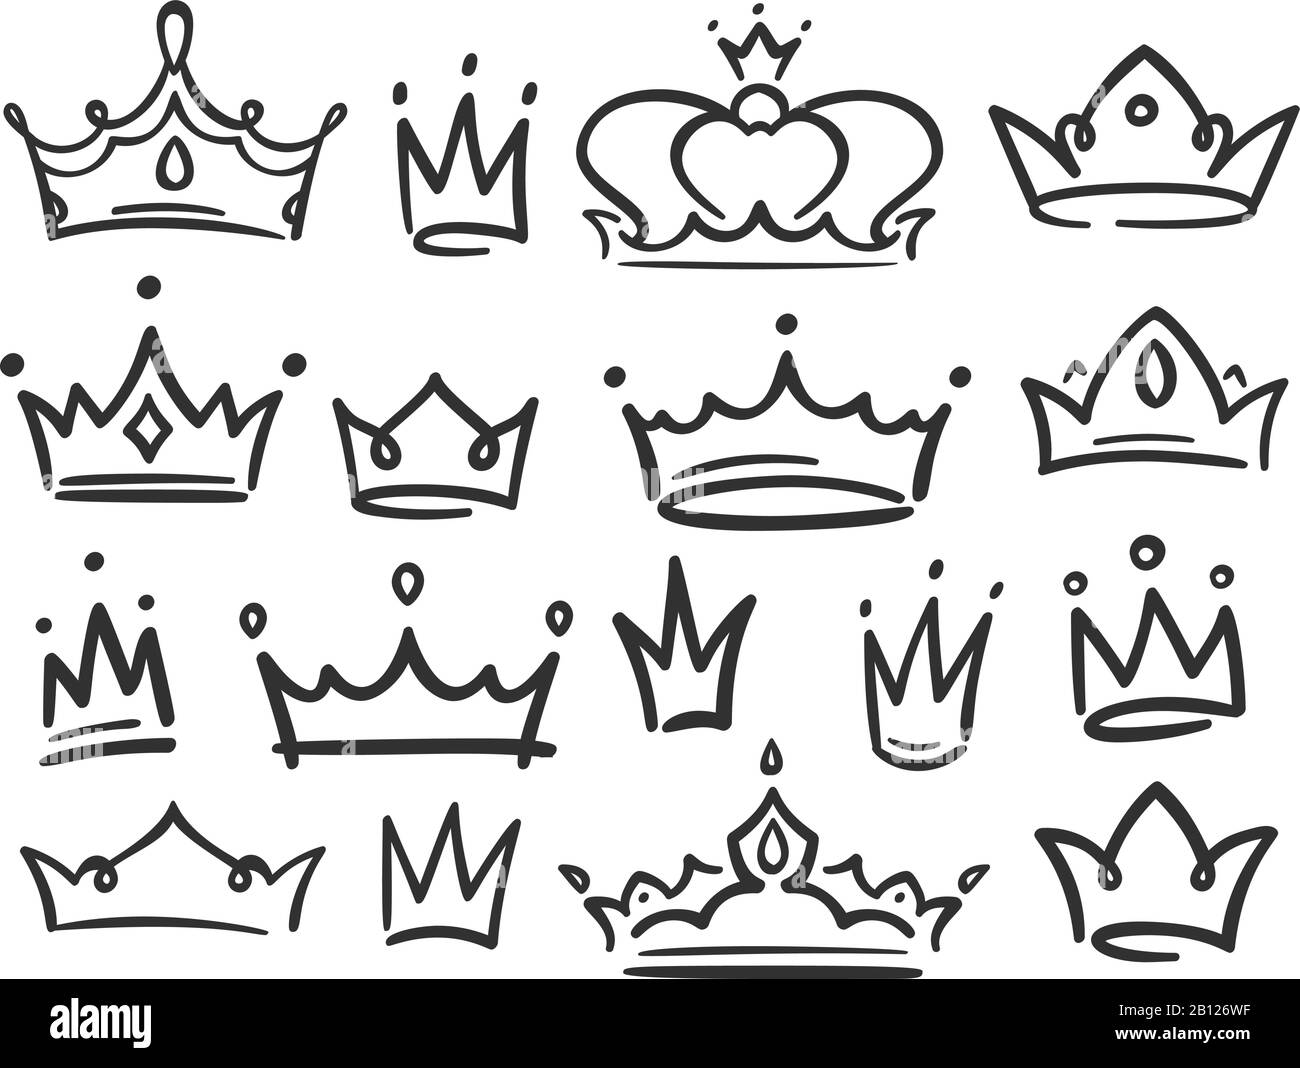 Sketch crown. Simple graffiti crowning, elegant queen or king crowns hand drawn vector illustration Stock Vector